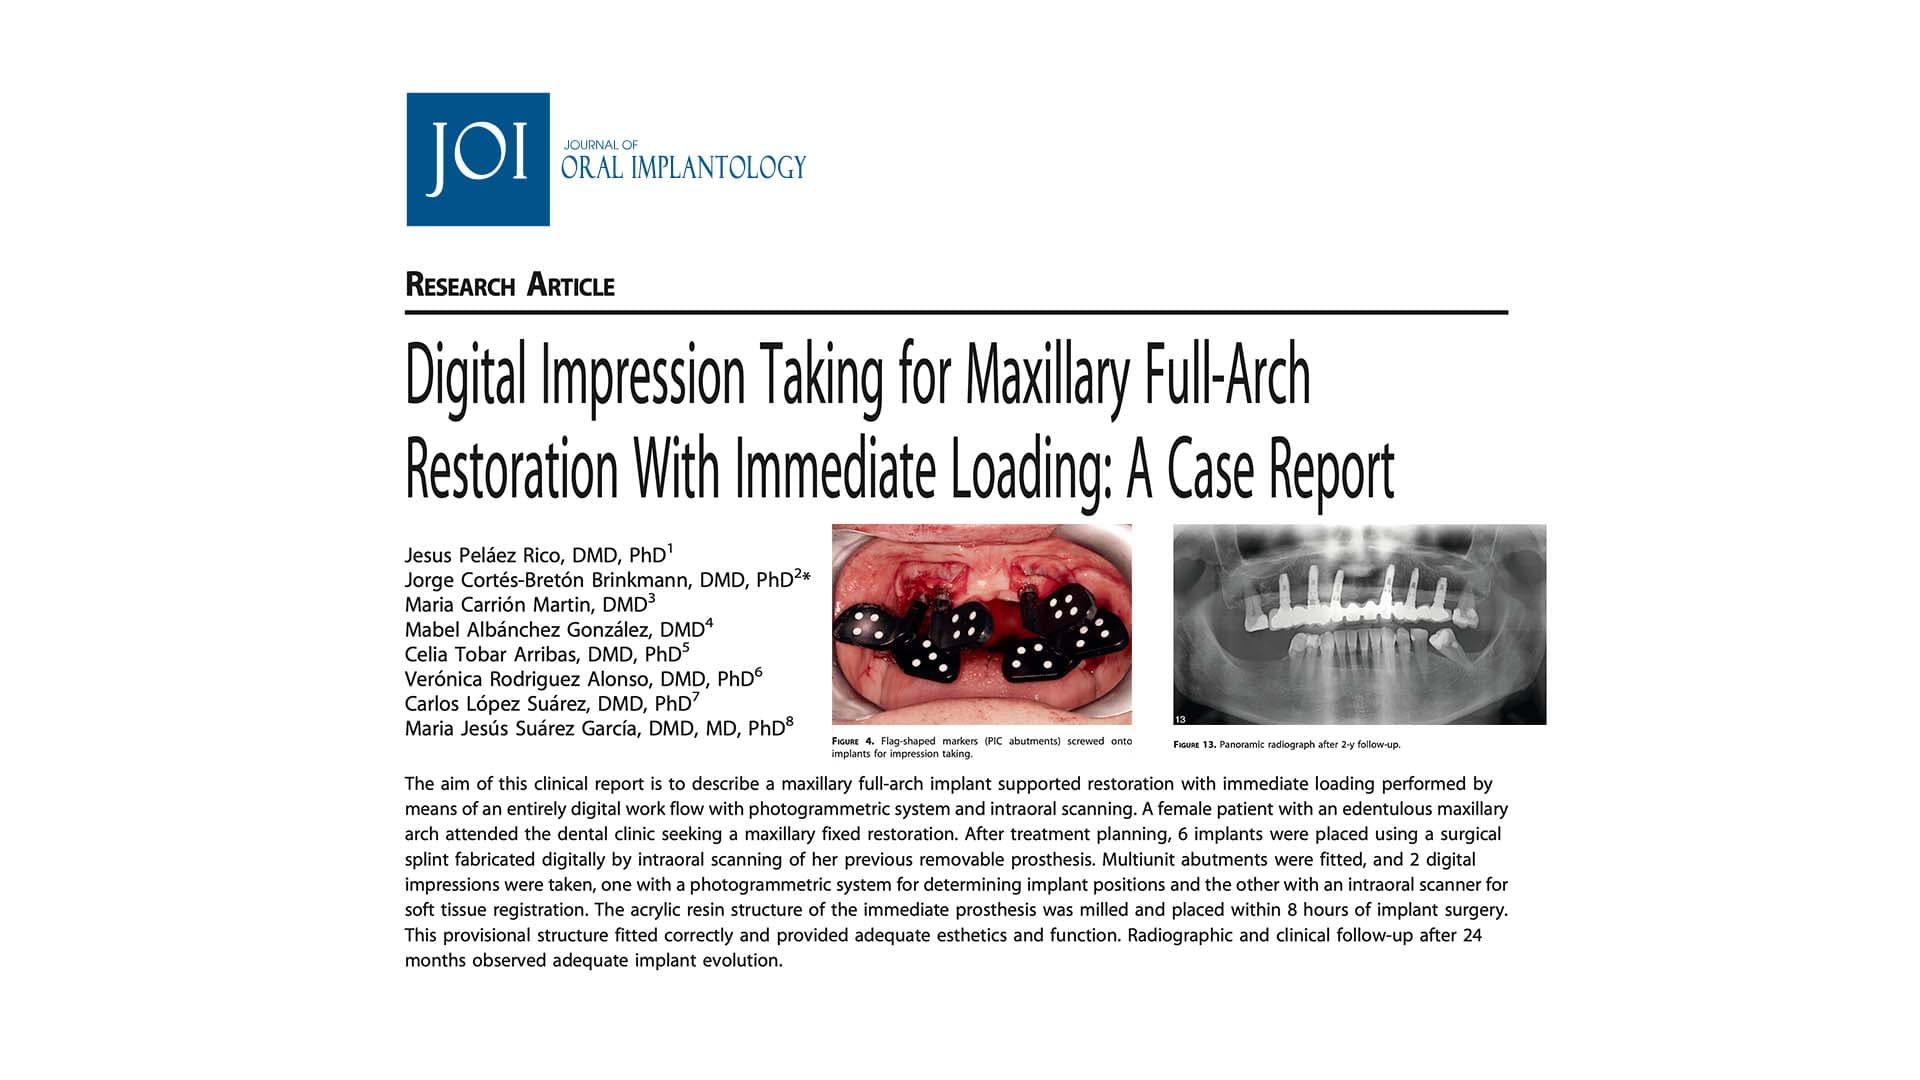 Digital Impression Taking for Maxillary Full-Arch Restoration With Immediate Loading: A Case Report